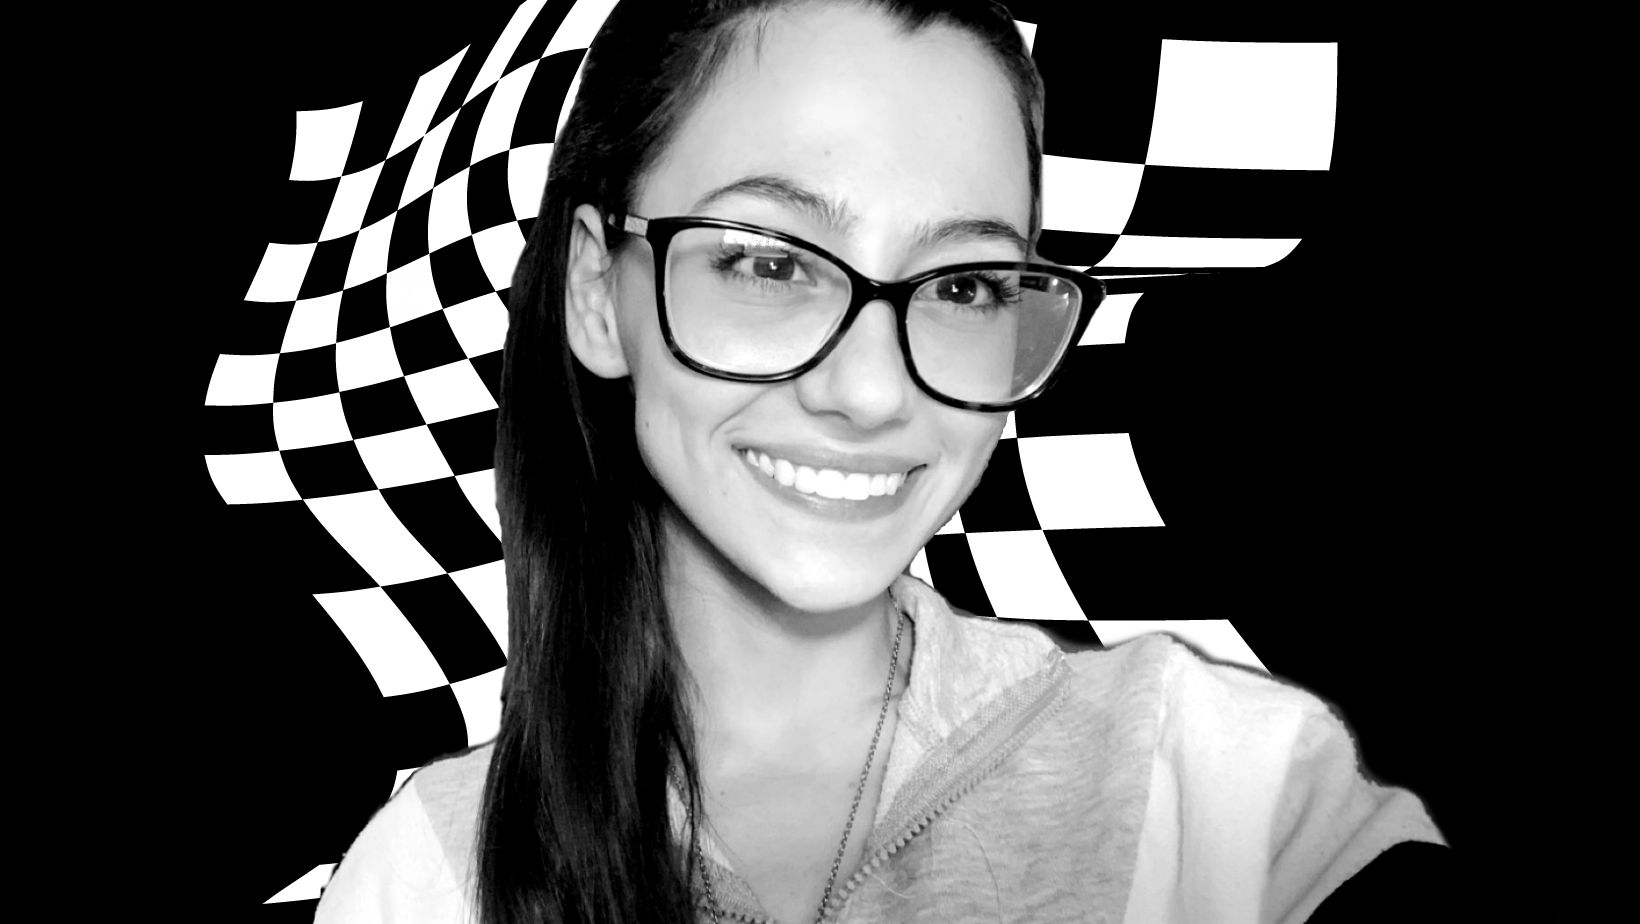 Black and white photo of woman in ponytail with glasses smiling over wavy checkered background